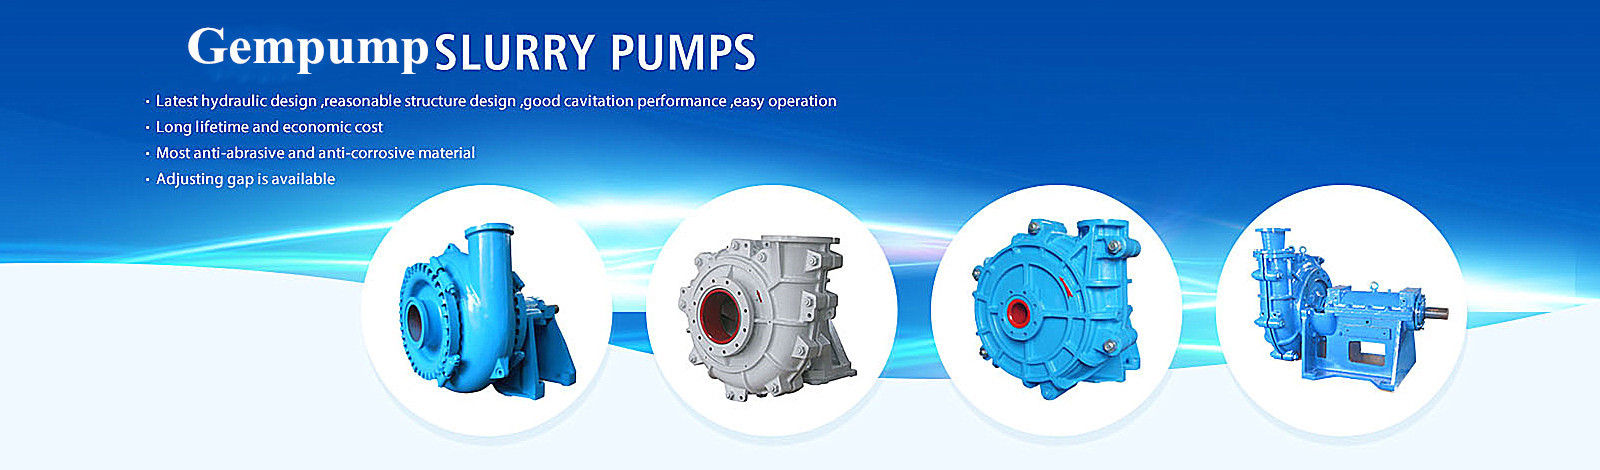 Industrial Centrifugal Pumps